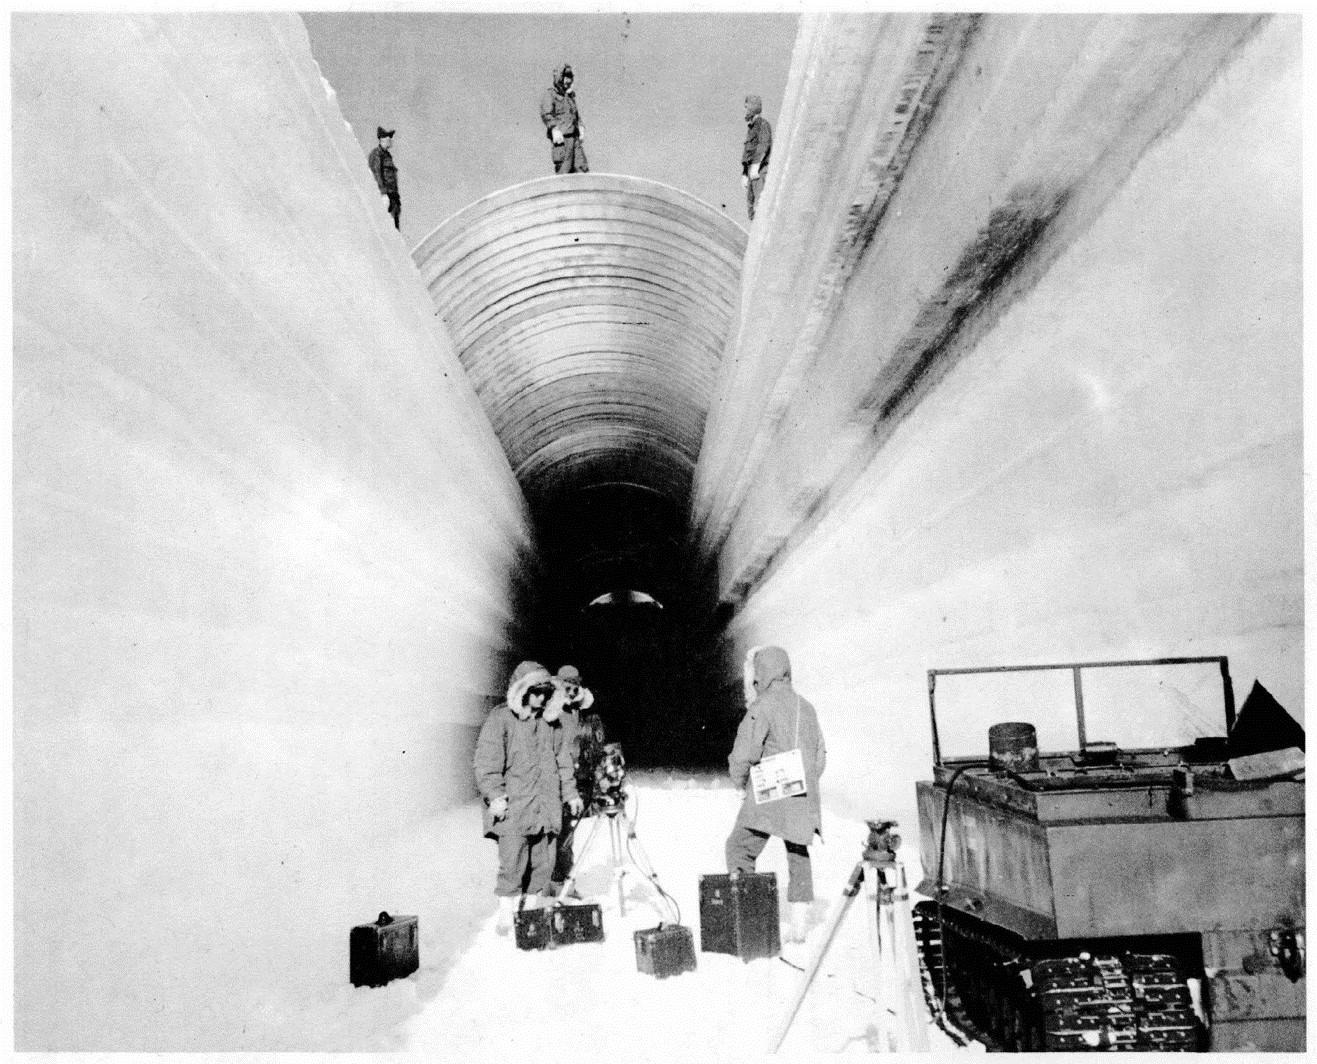 Workers build the snow tunnels at the Camp Century research base in 1960. U.S. Army Corps of Engineers